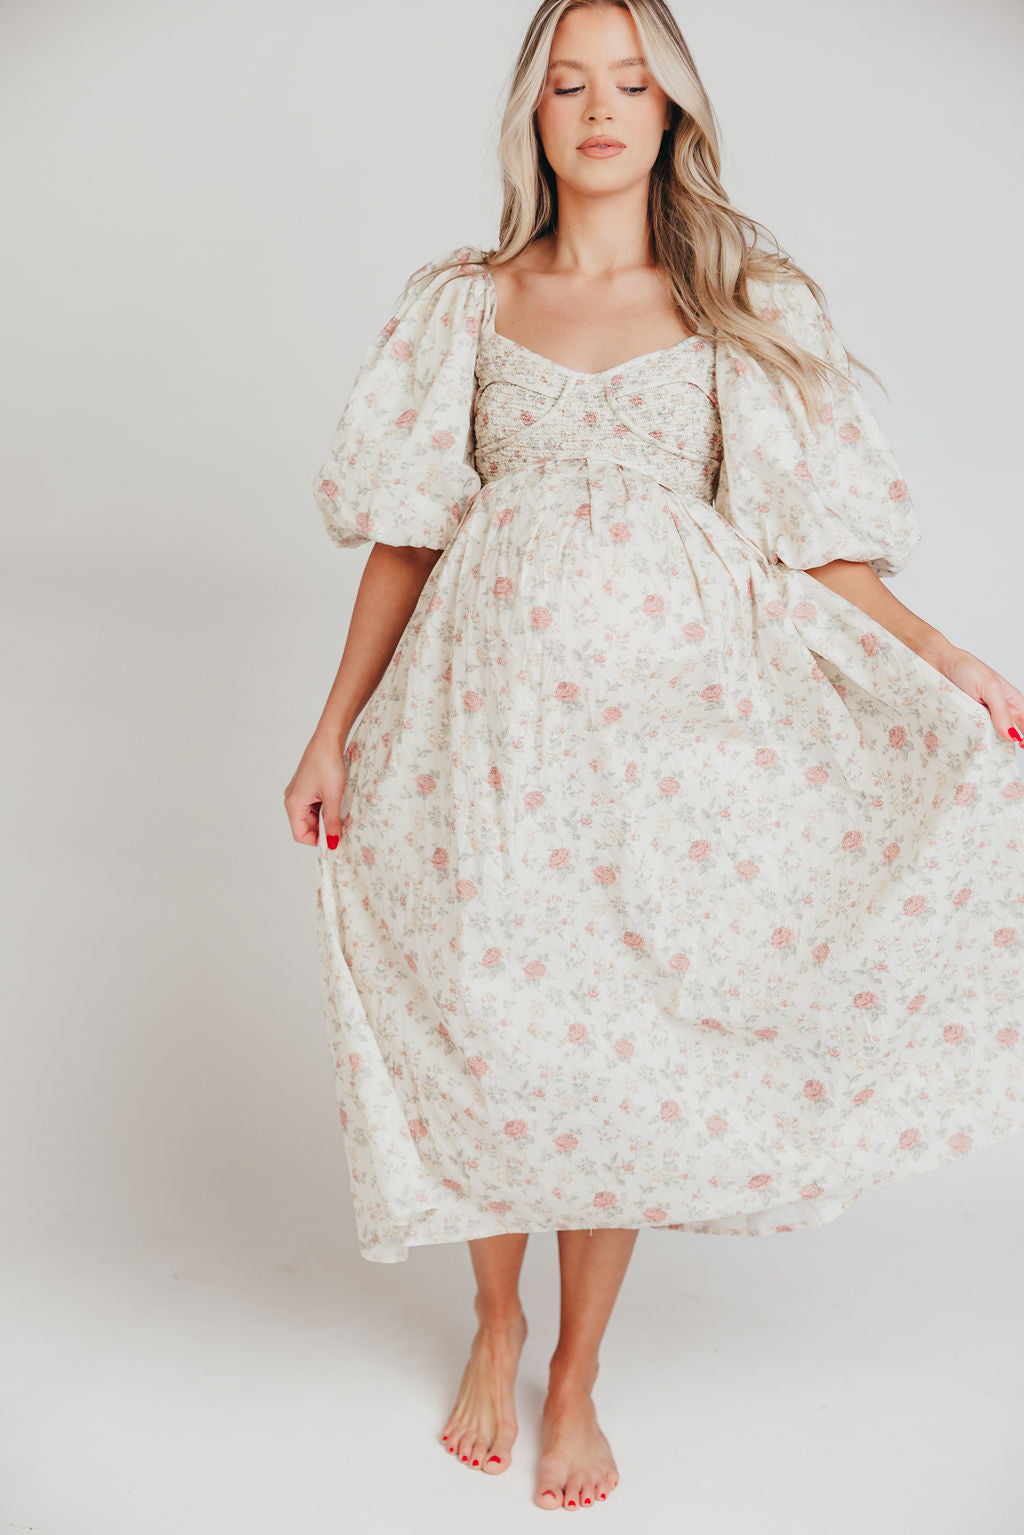 Harlow Maxi Dress in Off-White Floral - Bump Friendly & Inclusive Sizing (S-3XL)